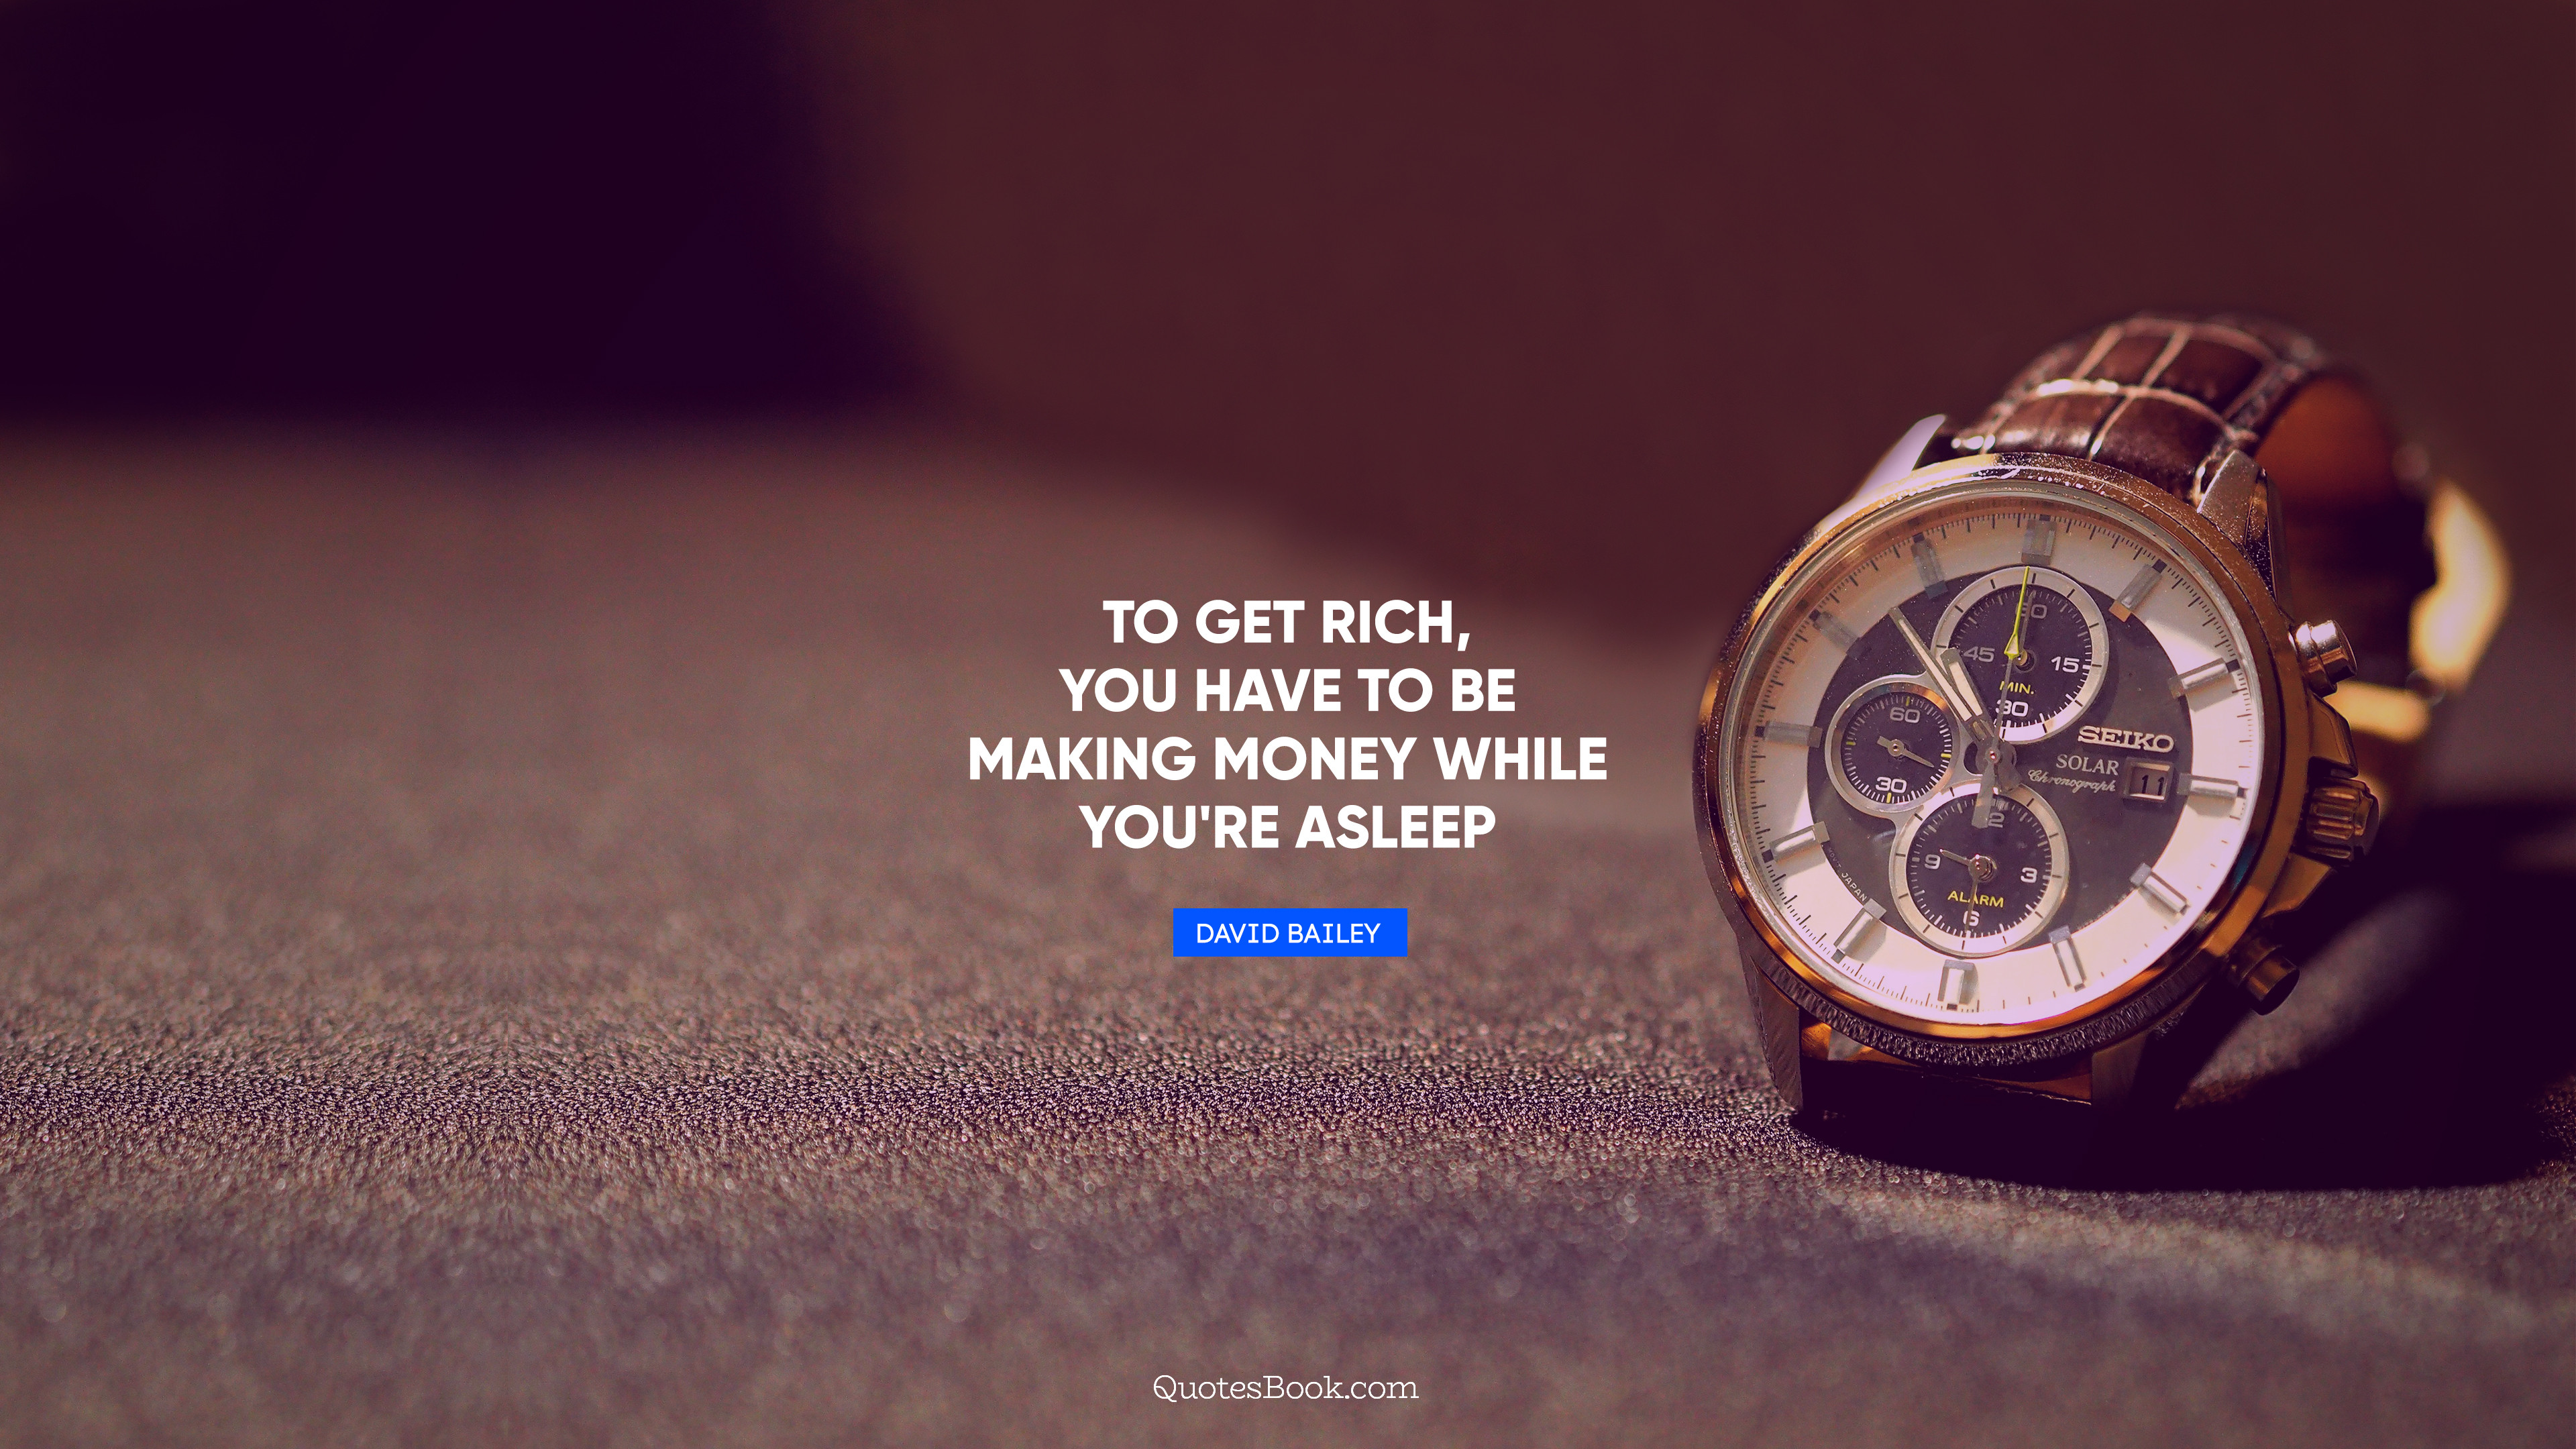 To get rich, you have to be making money while you're asleep. - Quote